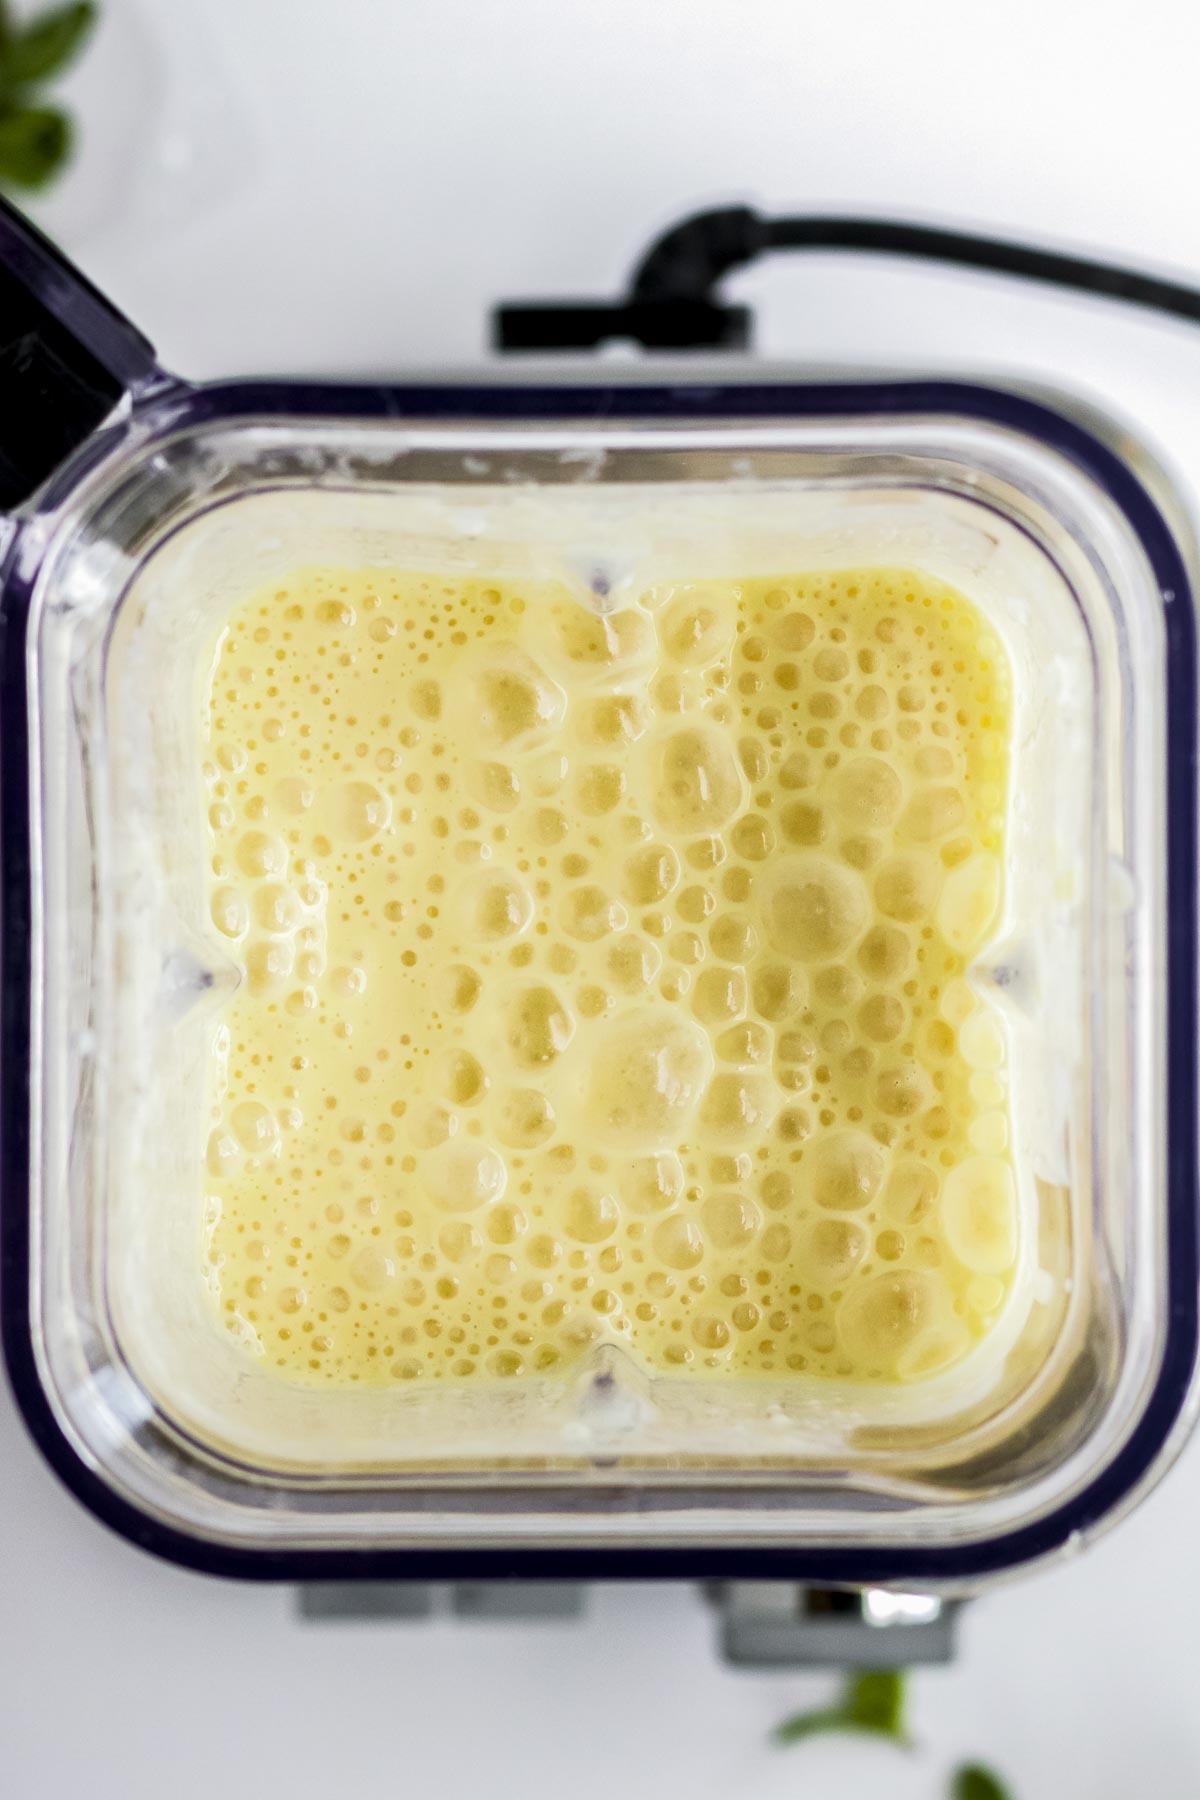 Overhead view of blender filled with orange creamsicle mixture.